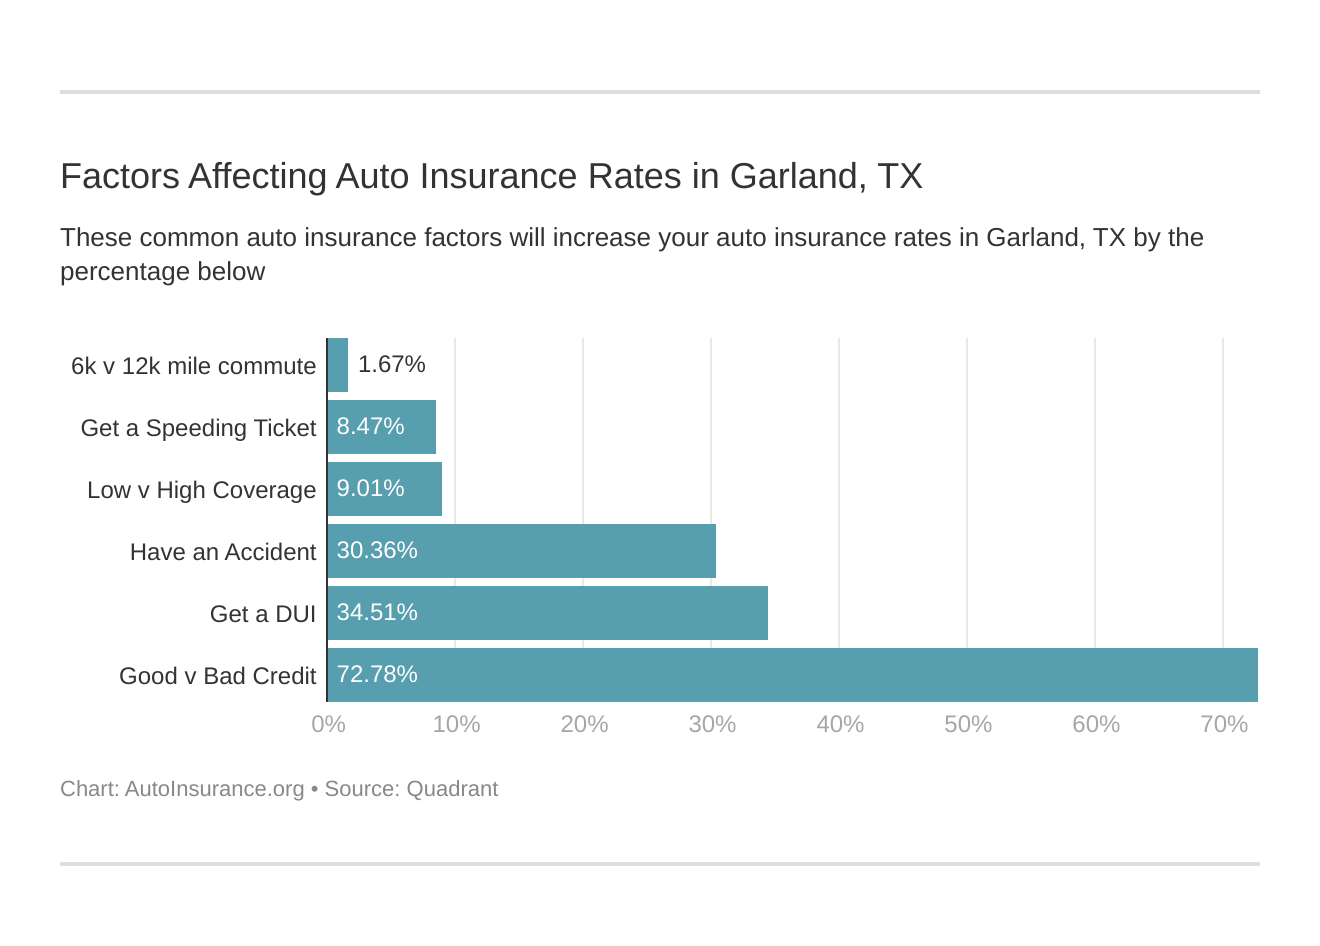 Factors Affecting Auto Insurance Rates in Garland, TX